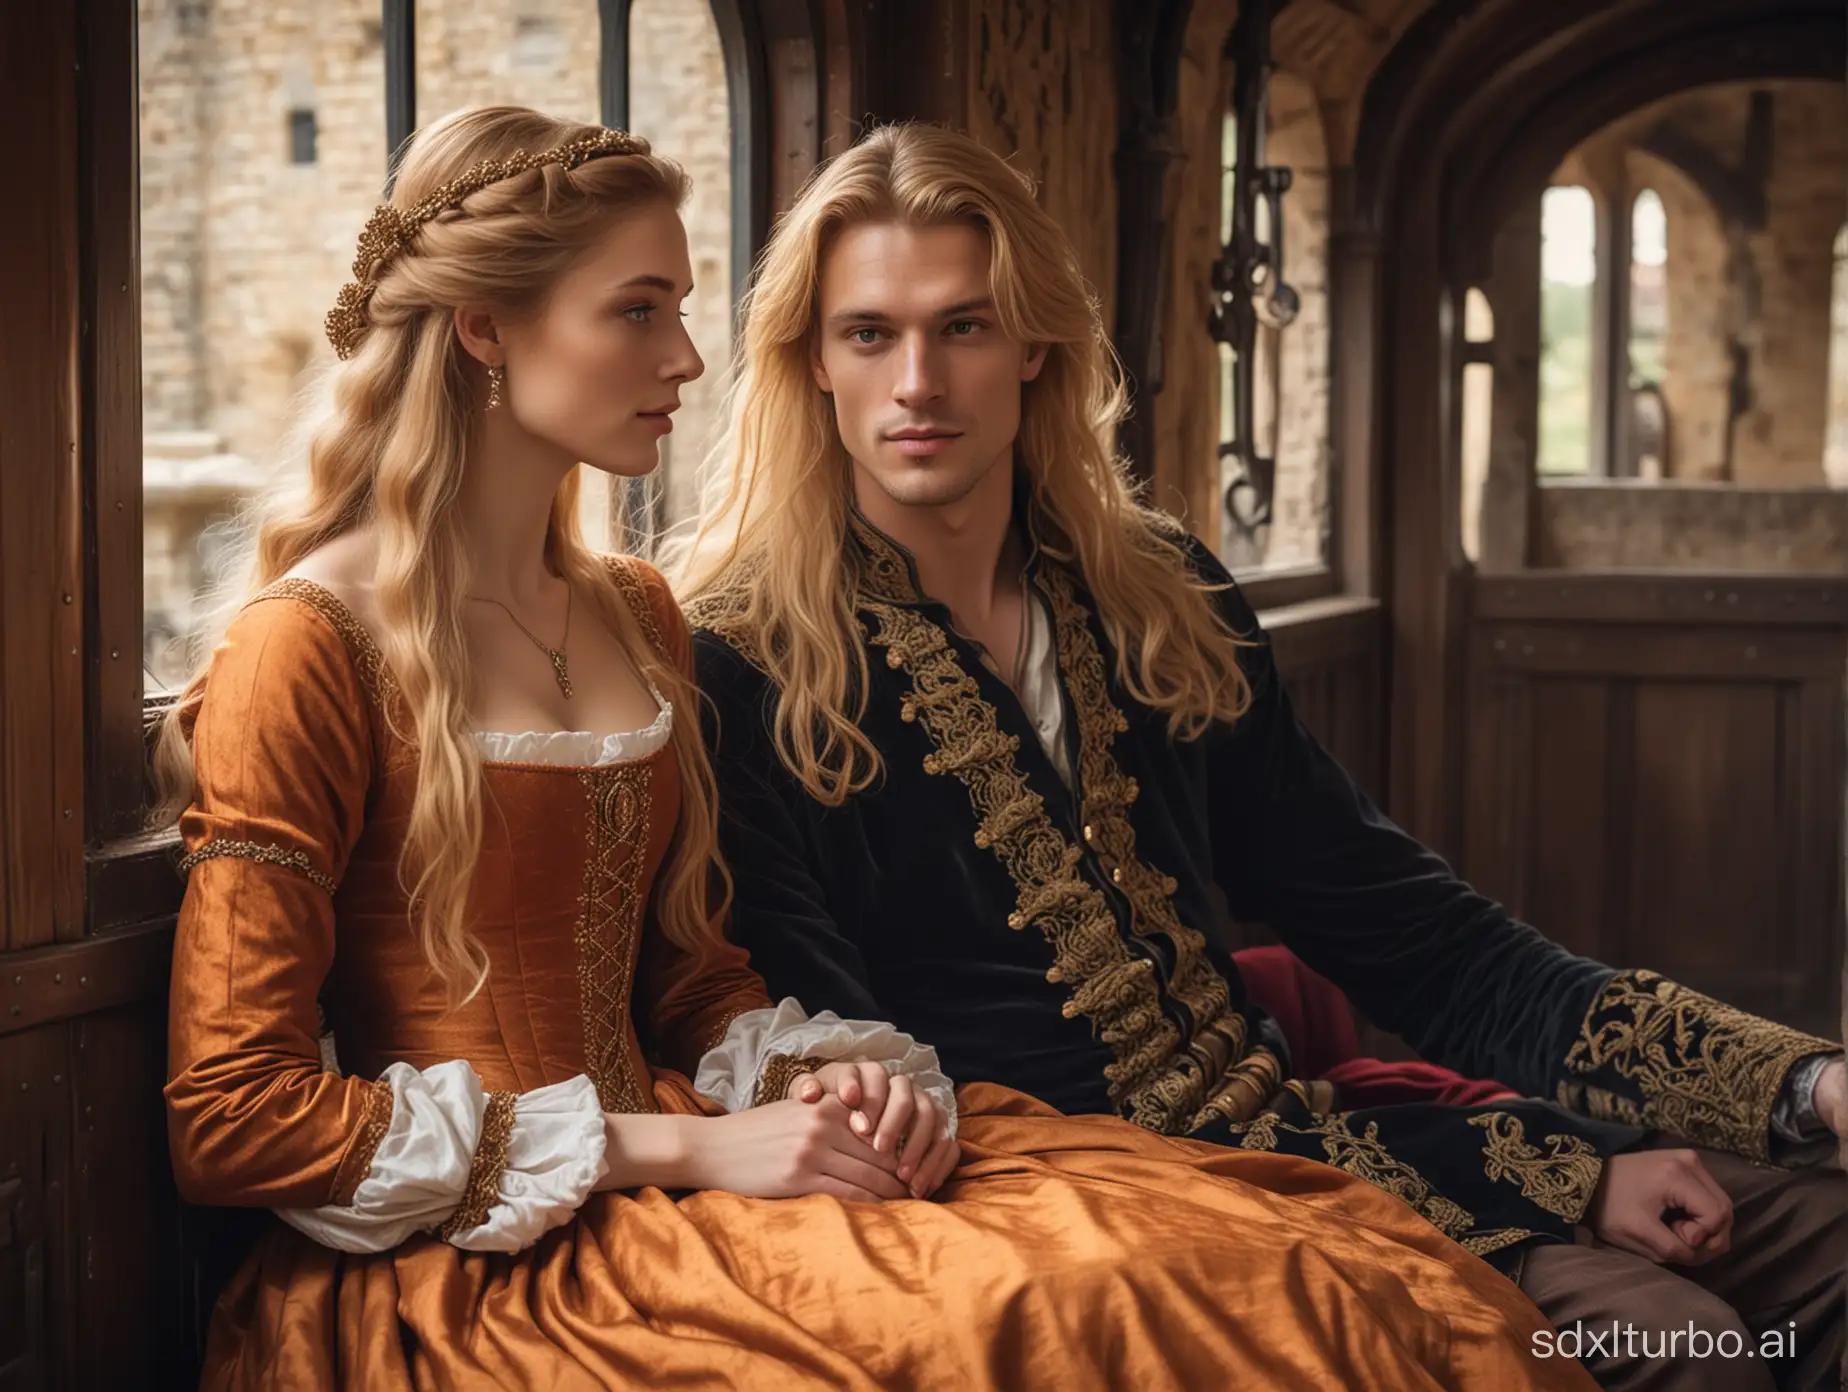 A handsome blond (((man))) with long hair below his shoulders in a medieval costume and a beautiful slender (((woman))) with long russet hair with a reddish cast in a gorgeous medieval dress with a neckline, sit inside a luxurious closed carriage (((opposite each other)))